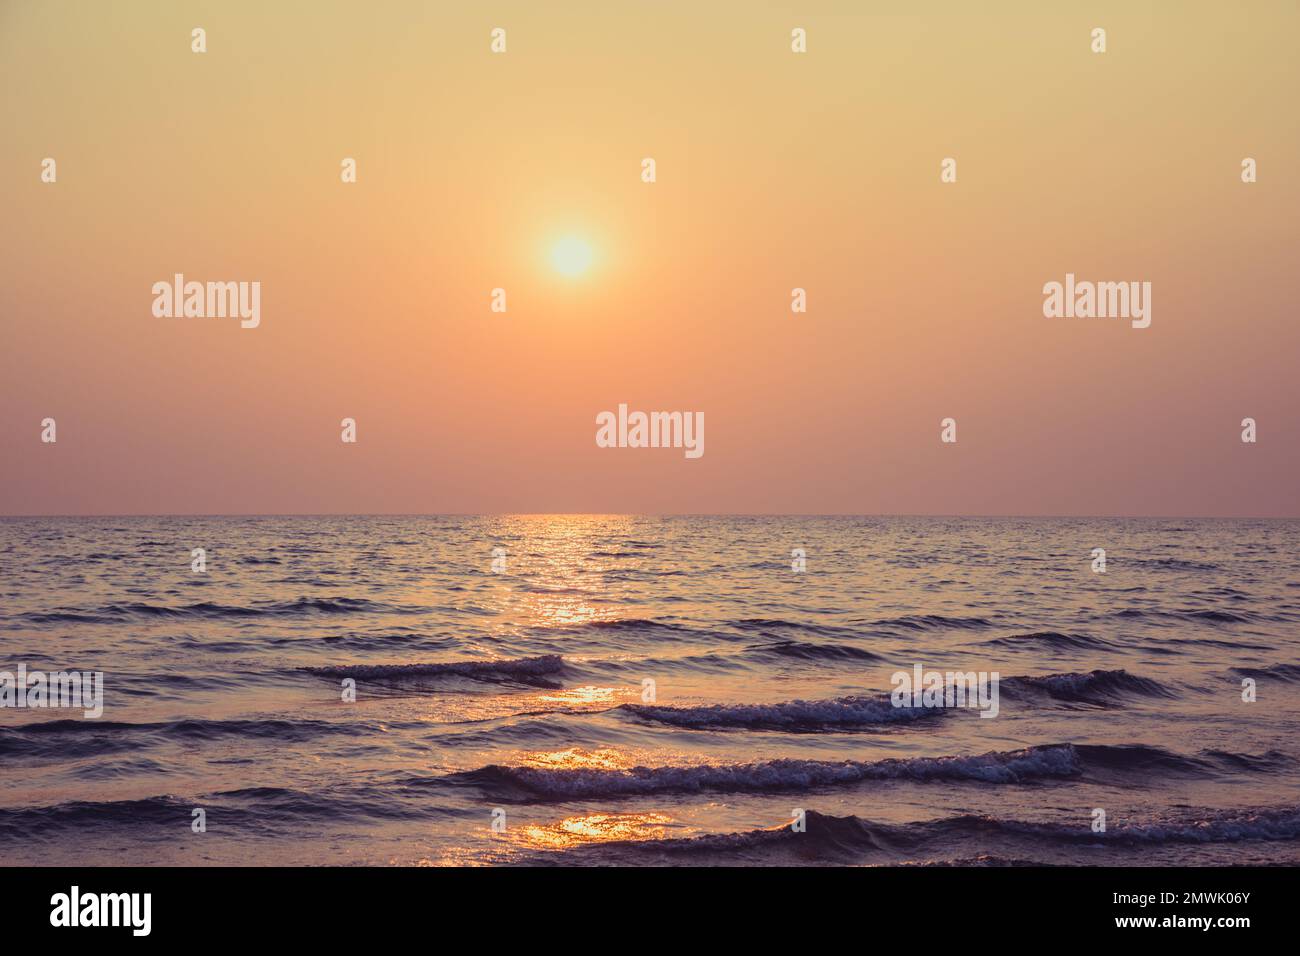 Sky and beach before sunset background Stock Photo